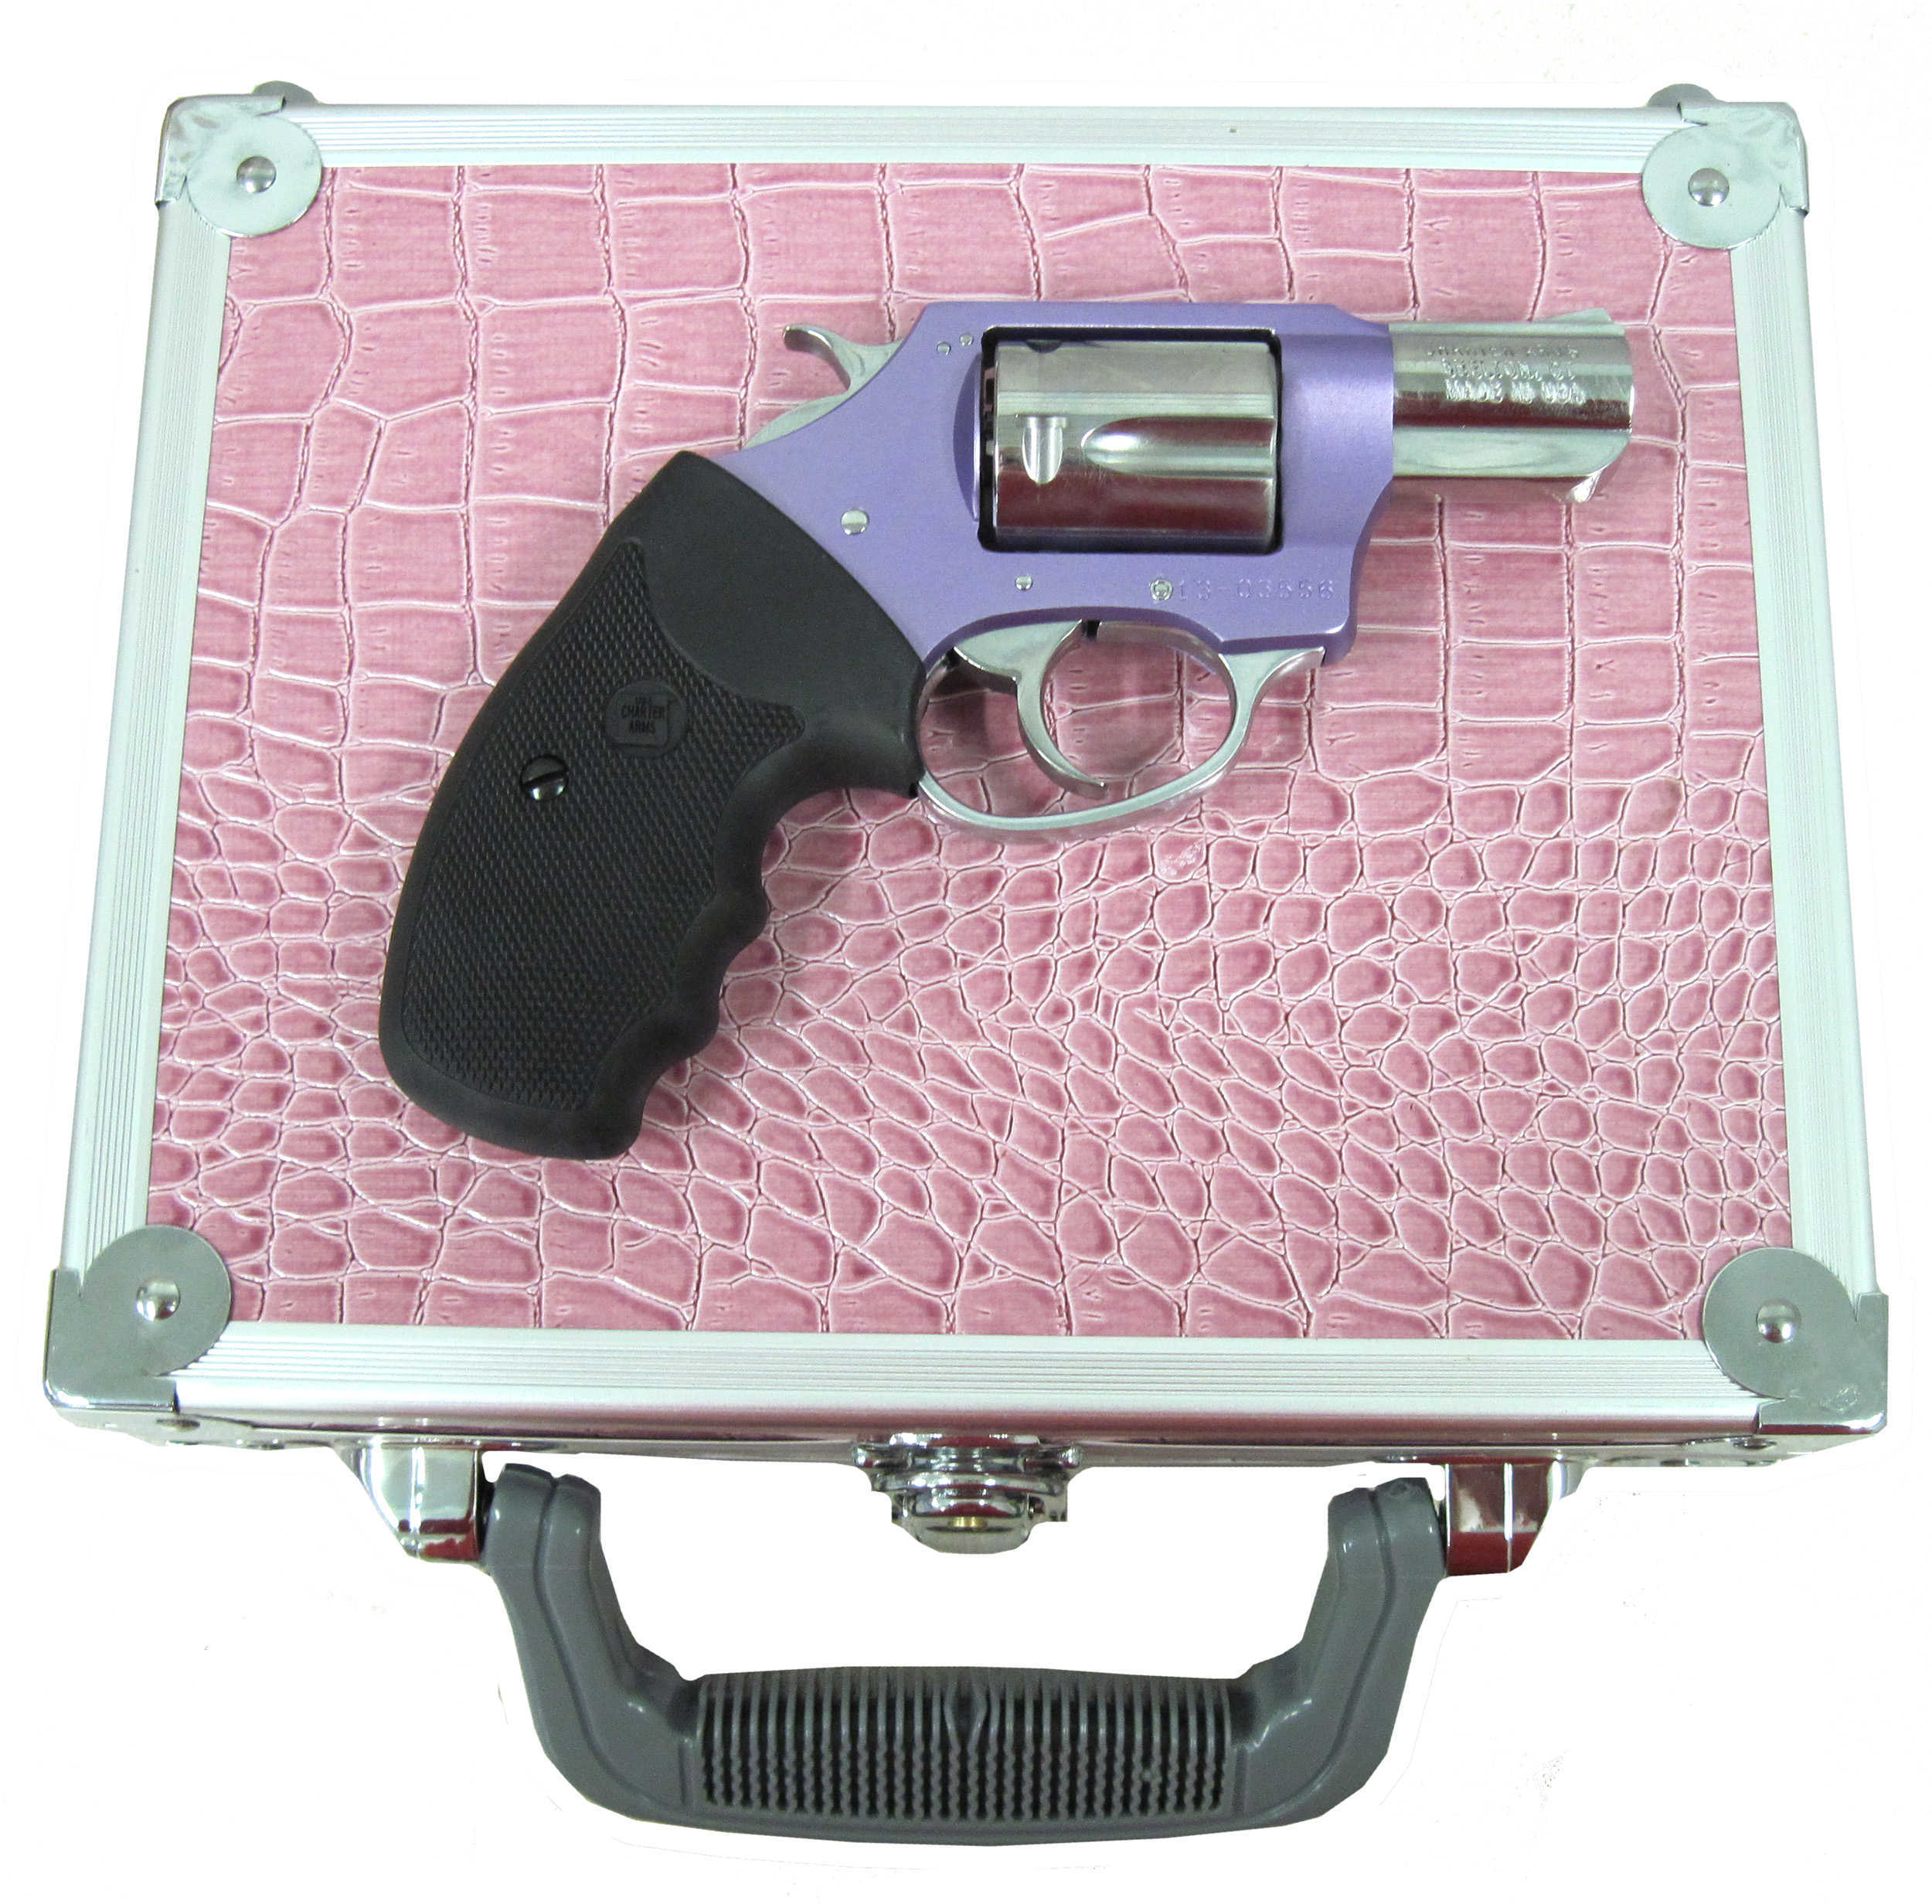 Charter Arms Undercover Lite Chic Lady Revolver 38 Special 2" Barrel 5 Rd Lavender Finish